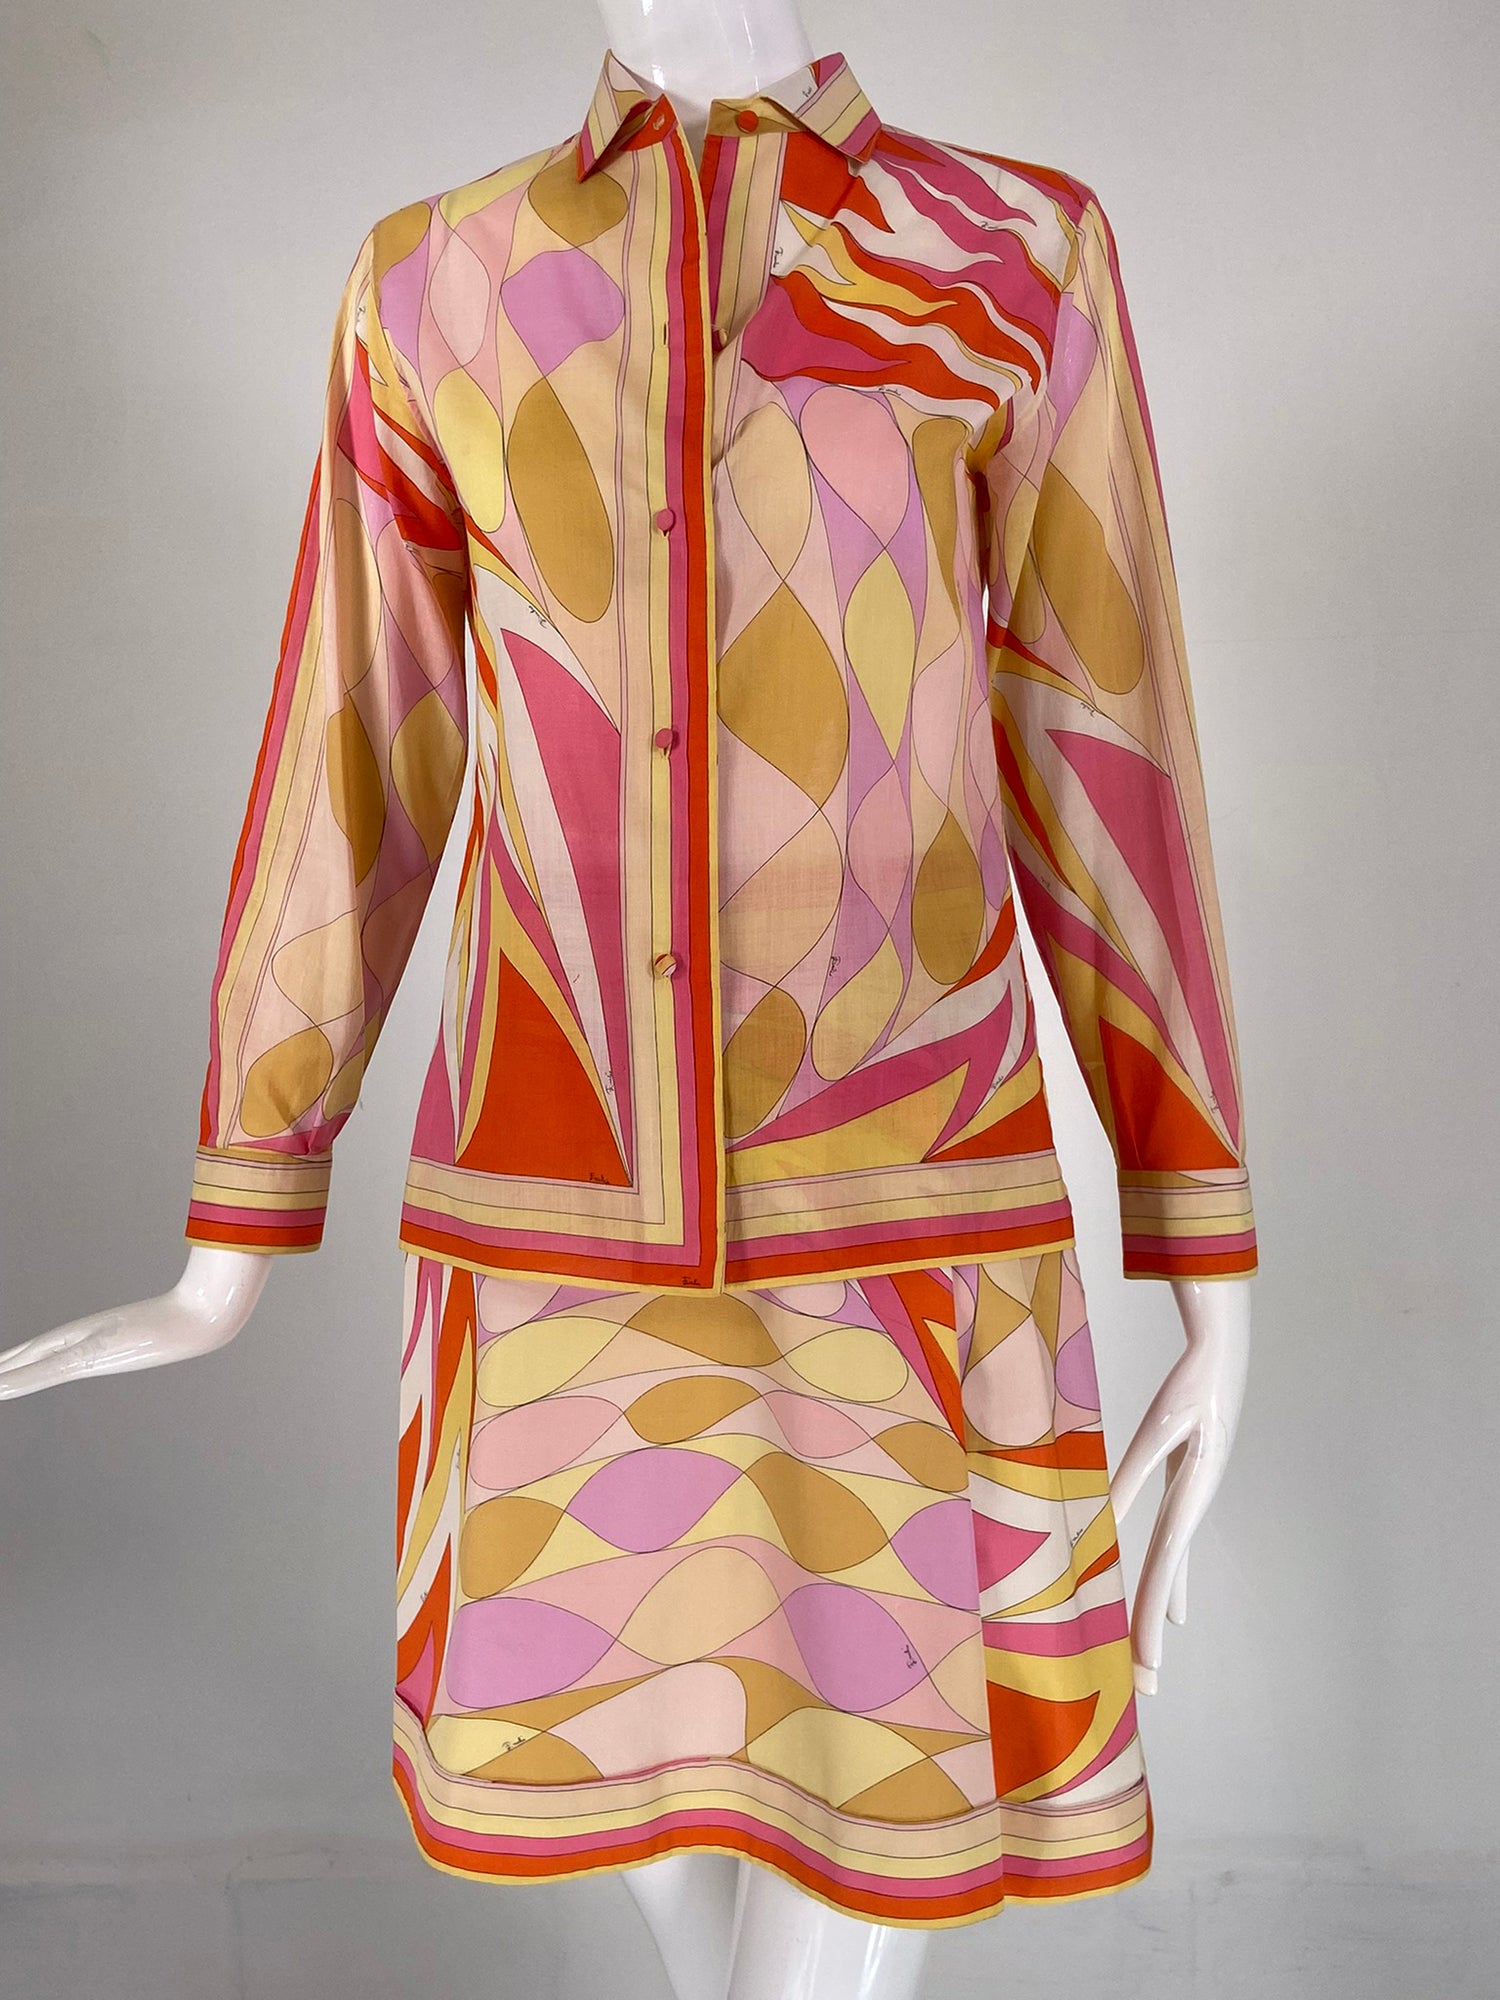 Emilio Pucci 1960s Pleated Skirt